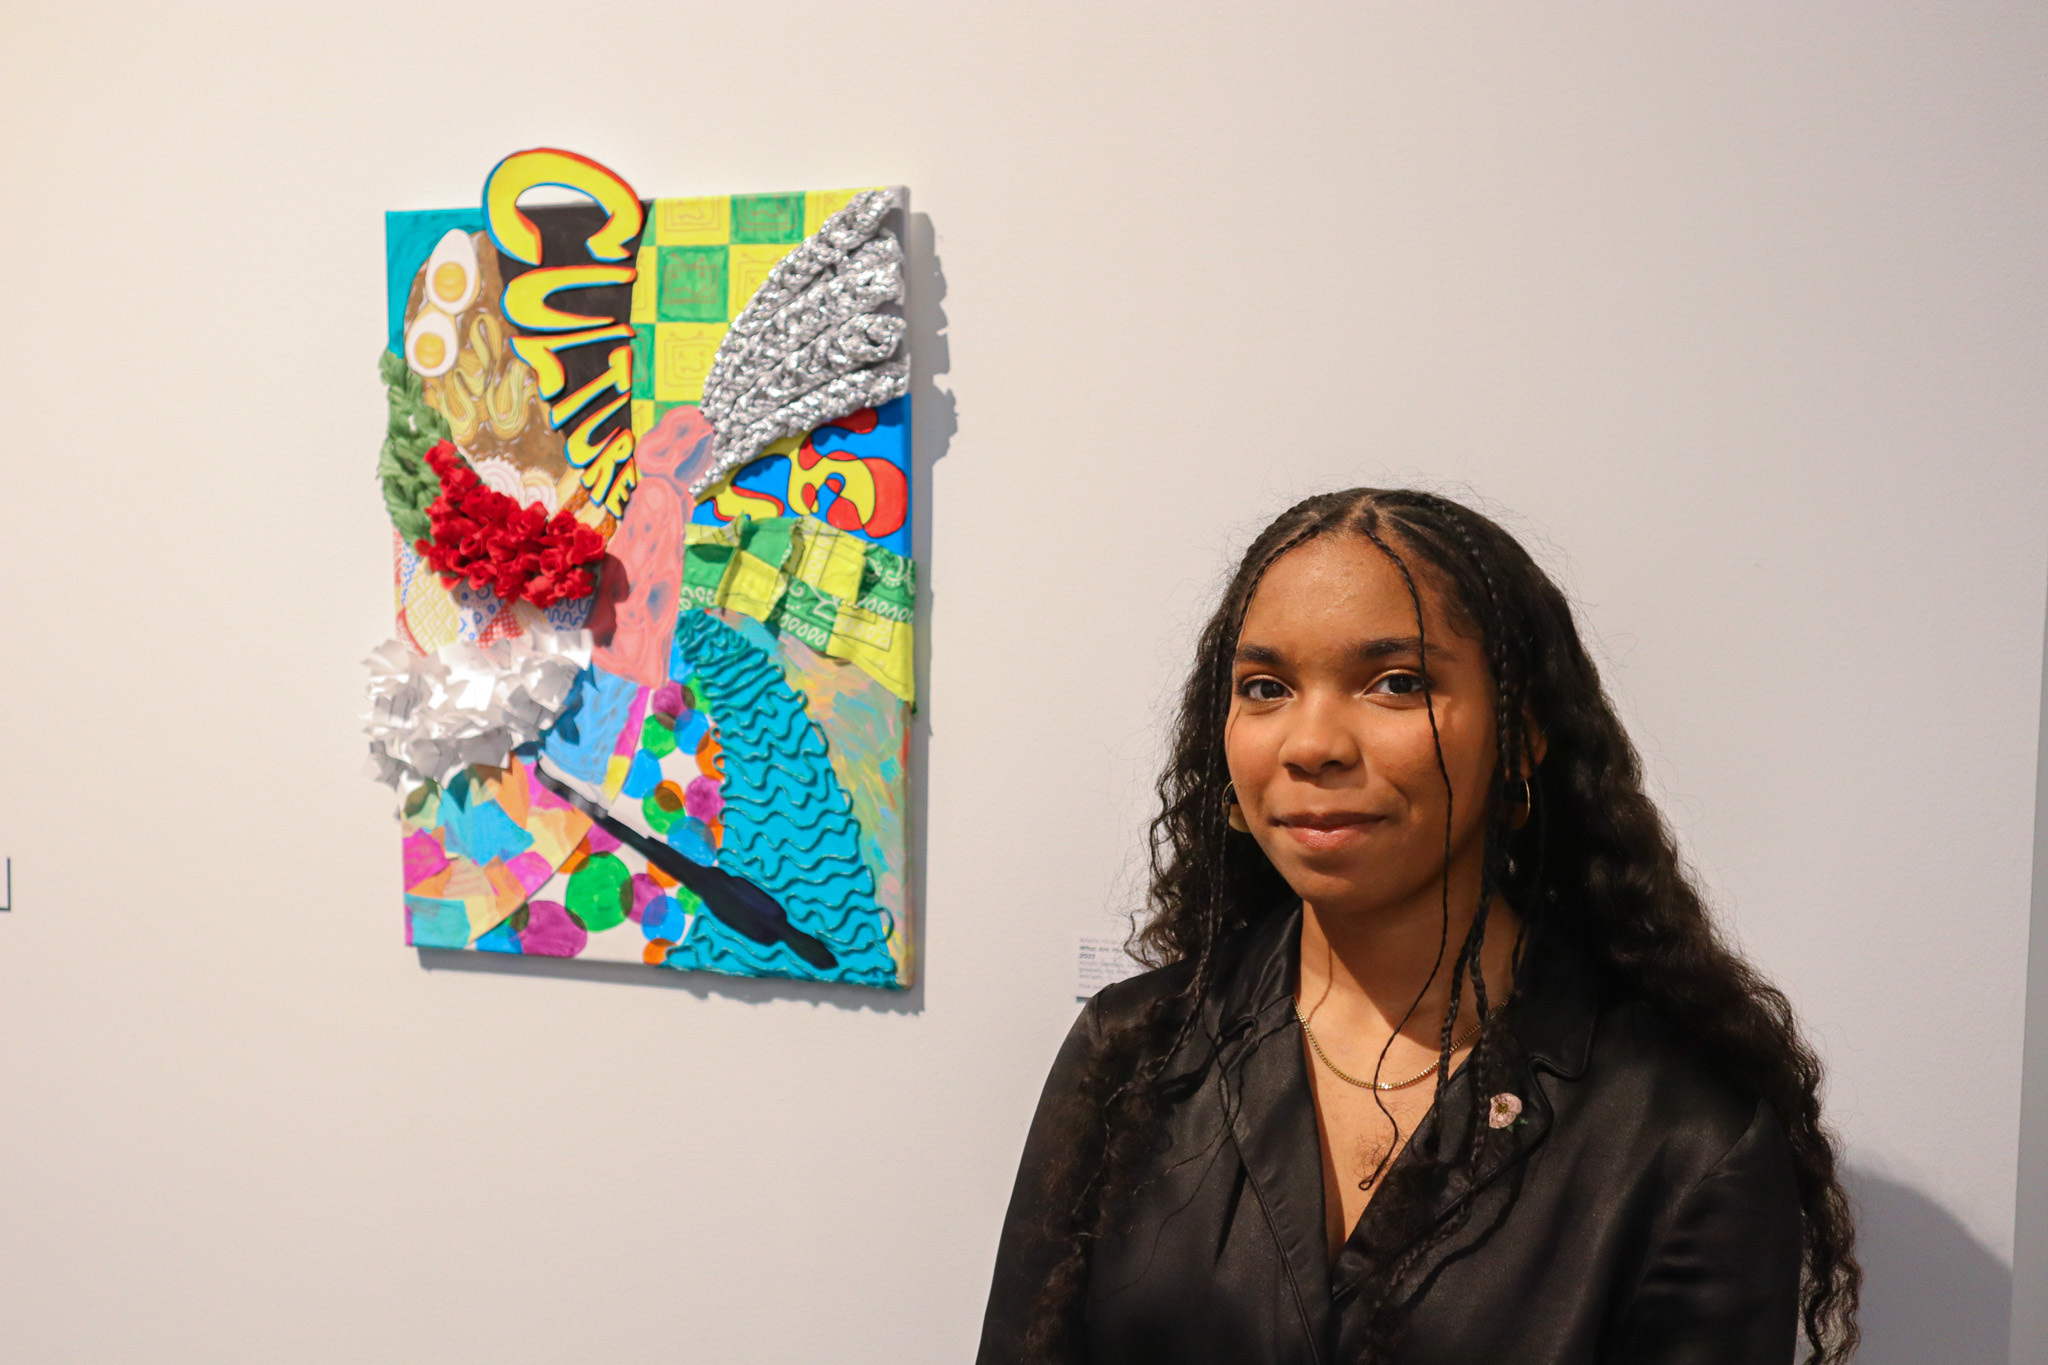 A young person with long dark hair and a black shirt stands in front of a colorful piece of multimedia art hanging on a white gallery wall